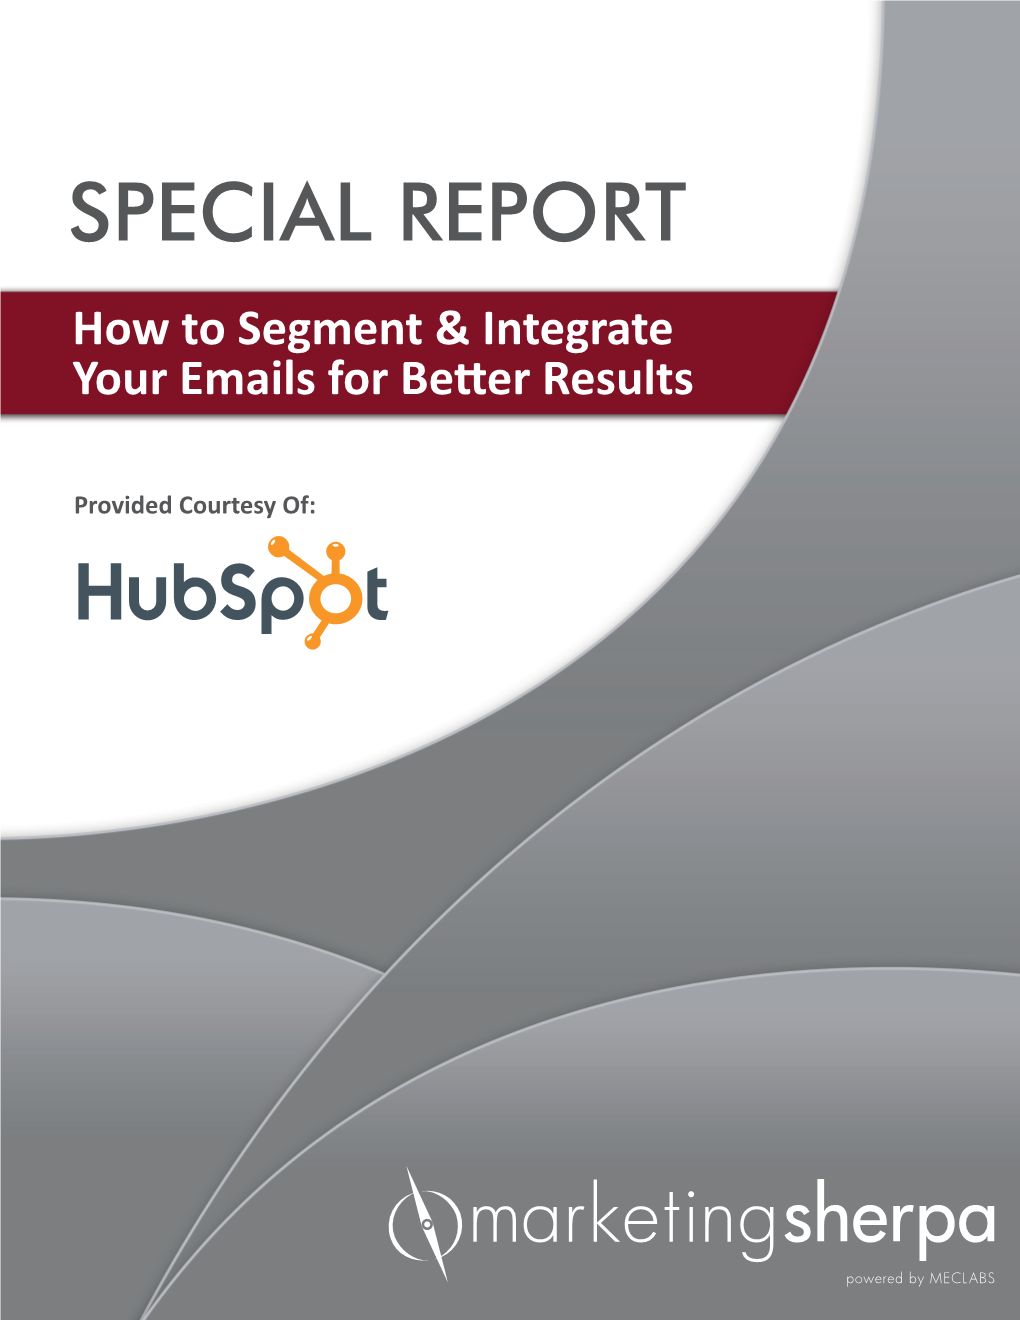 SPECIAL REPORT How to Segment & Integrate ���������������������������